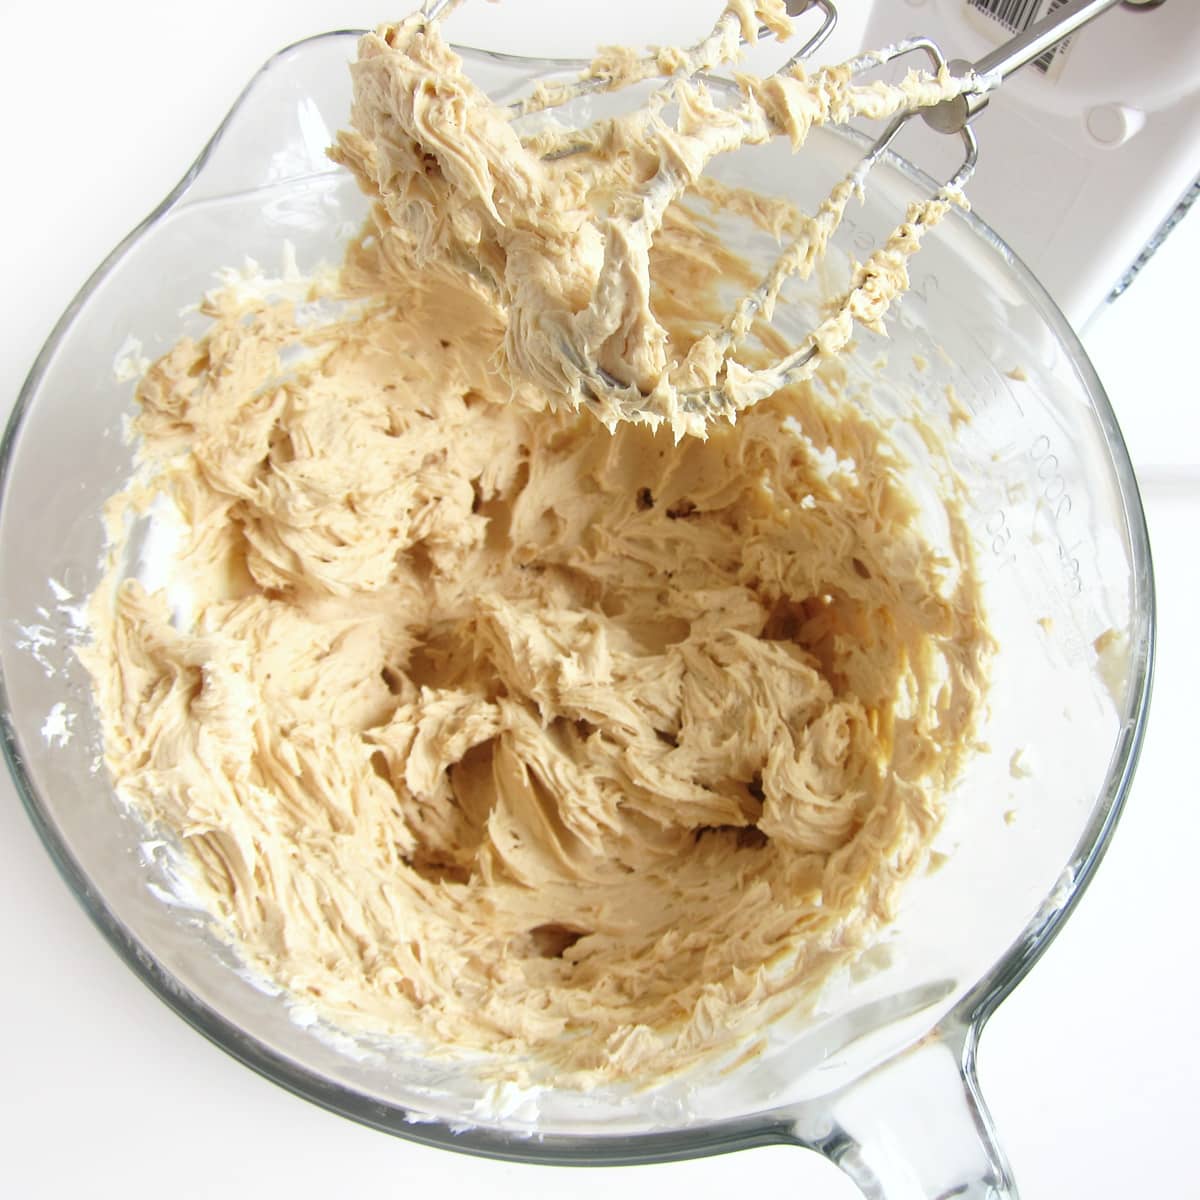 peanut butter and cream cheese whipped together in a mixing bowl.